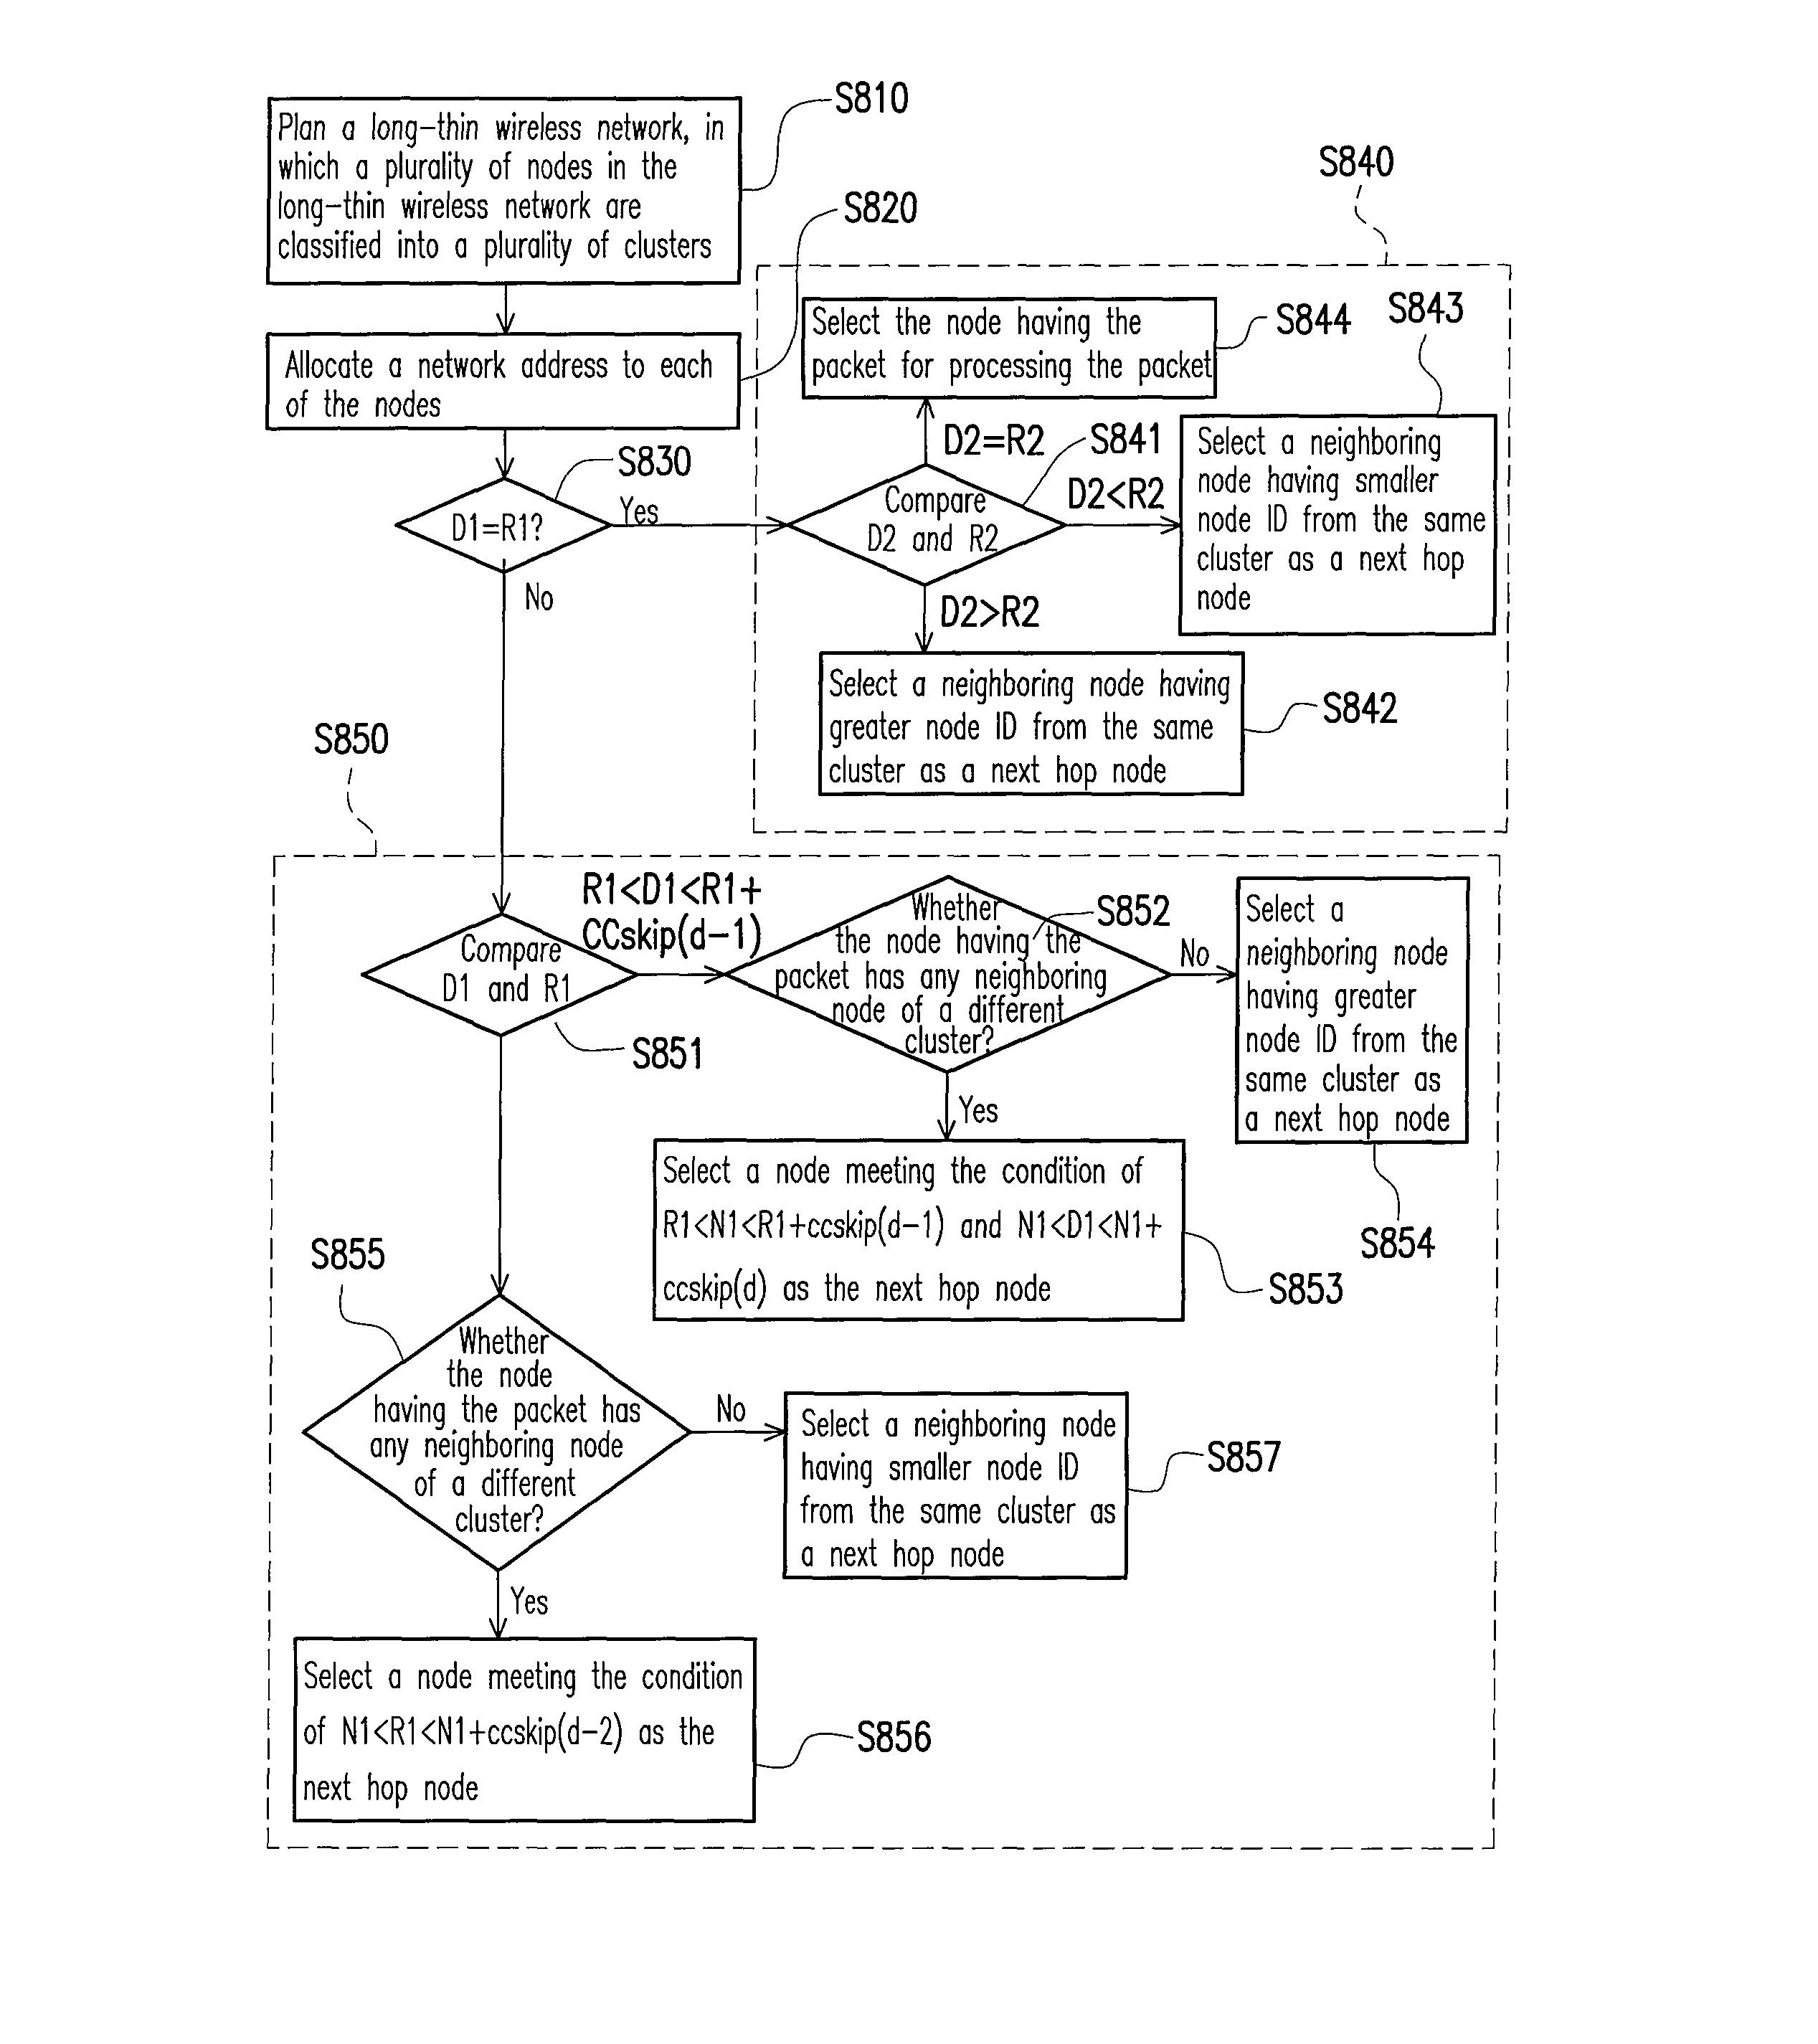 Network address assigning and allocating method and routing method for long-thin wireless network